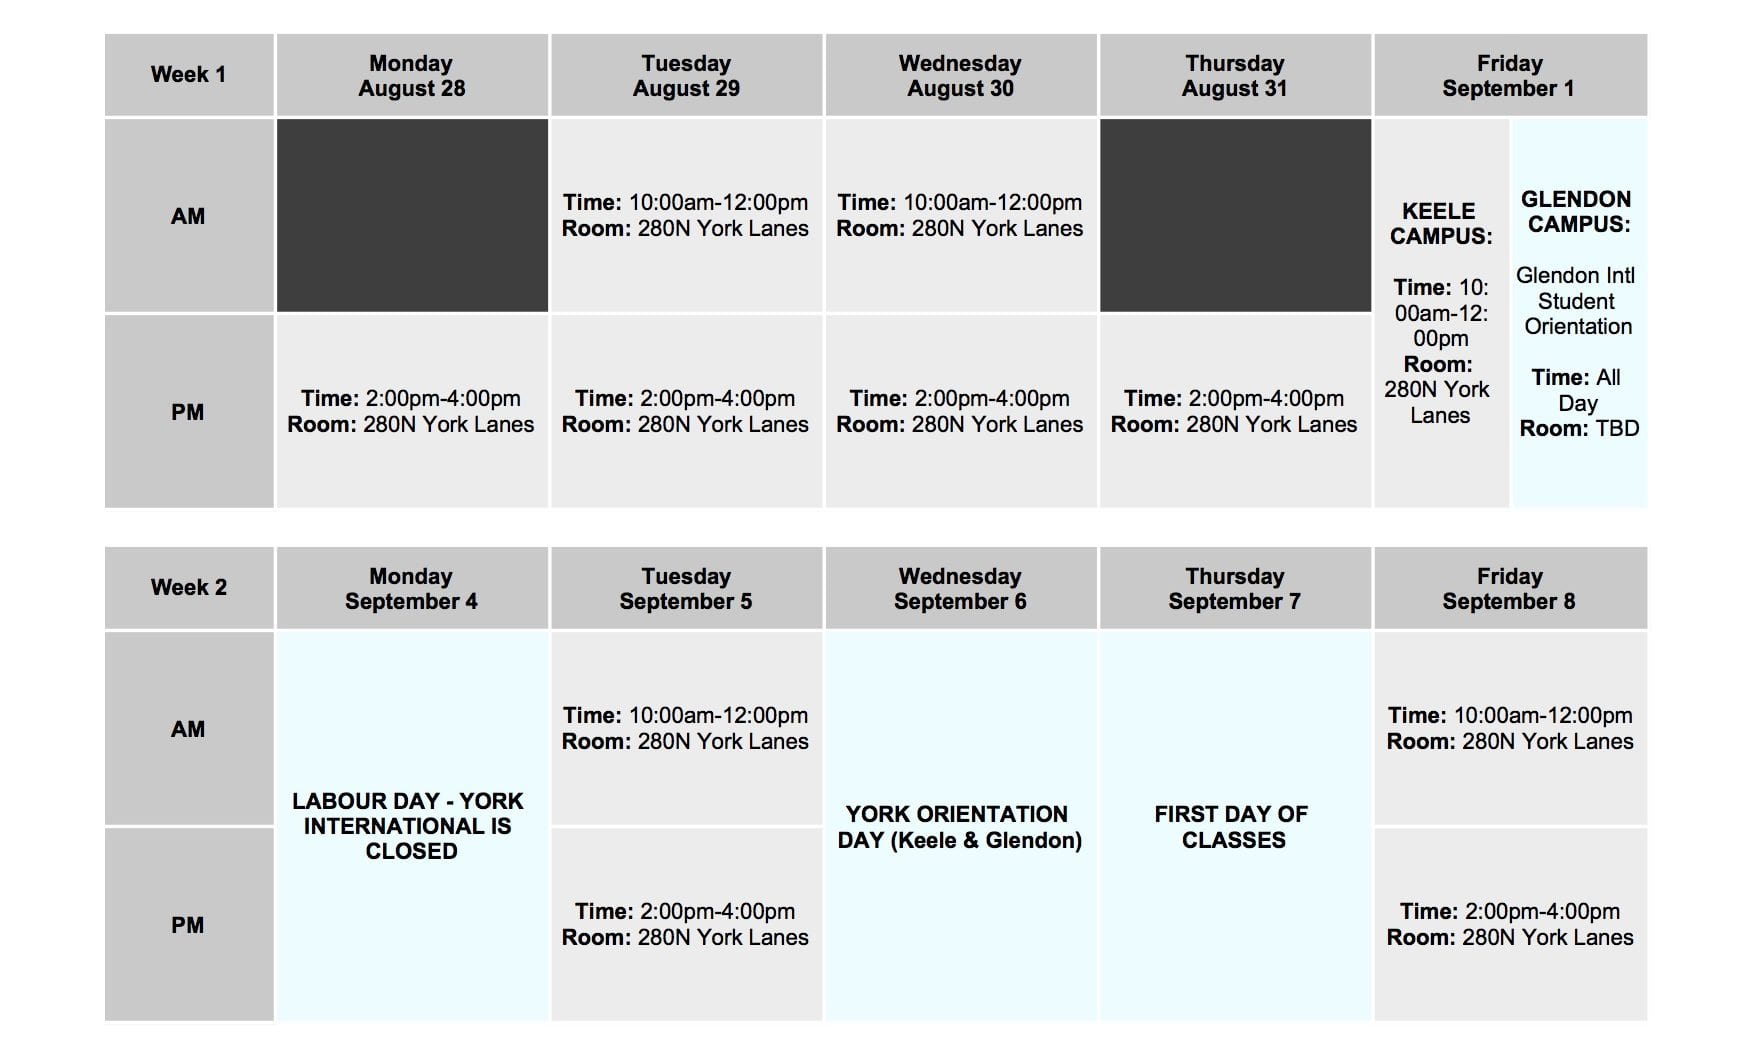 The schedule for York International's New Student Orientation